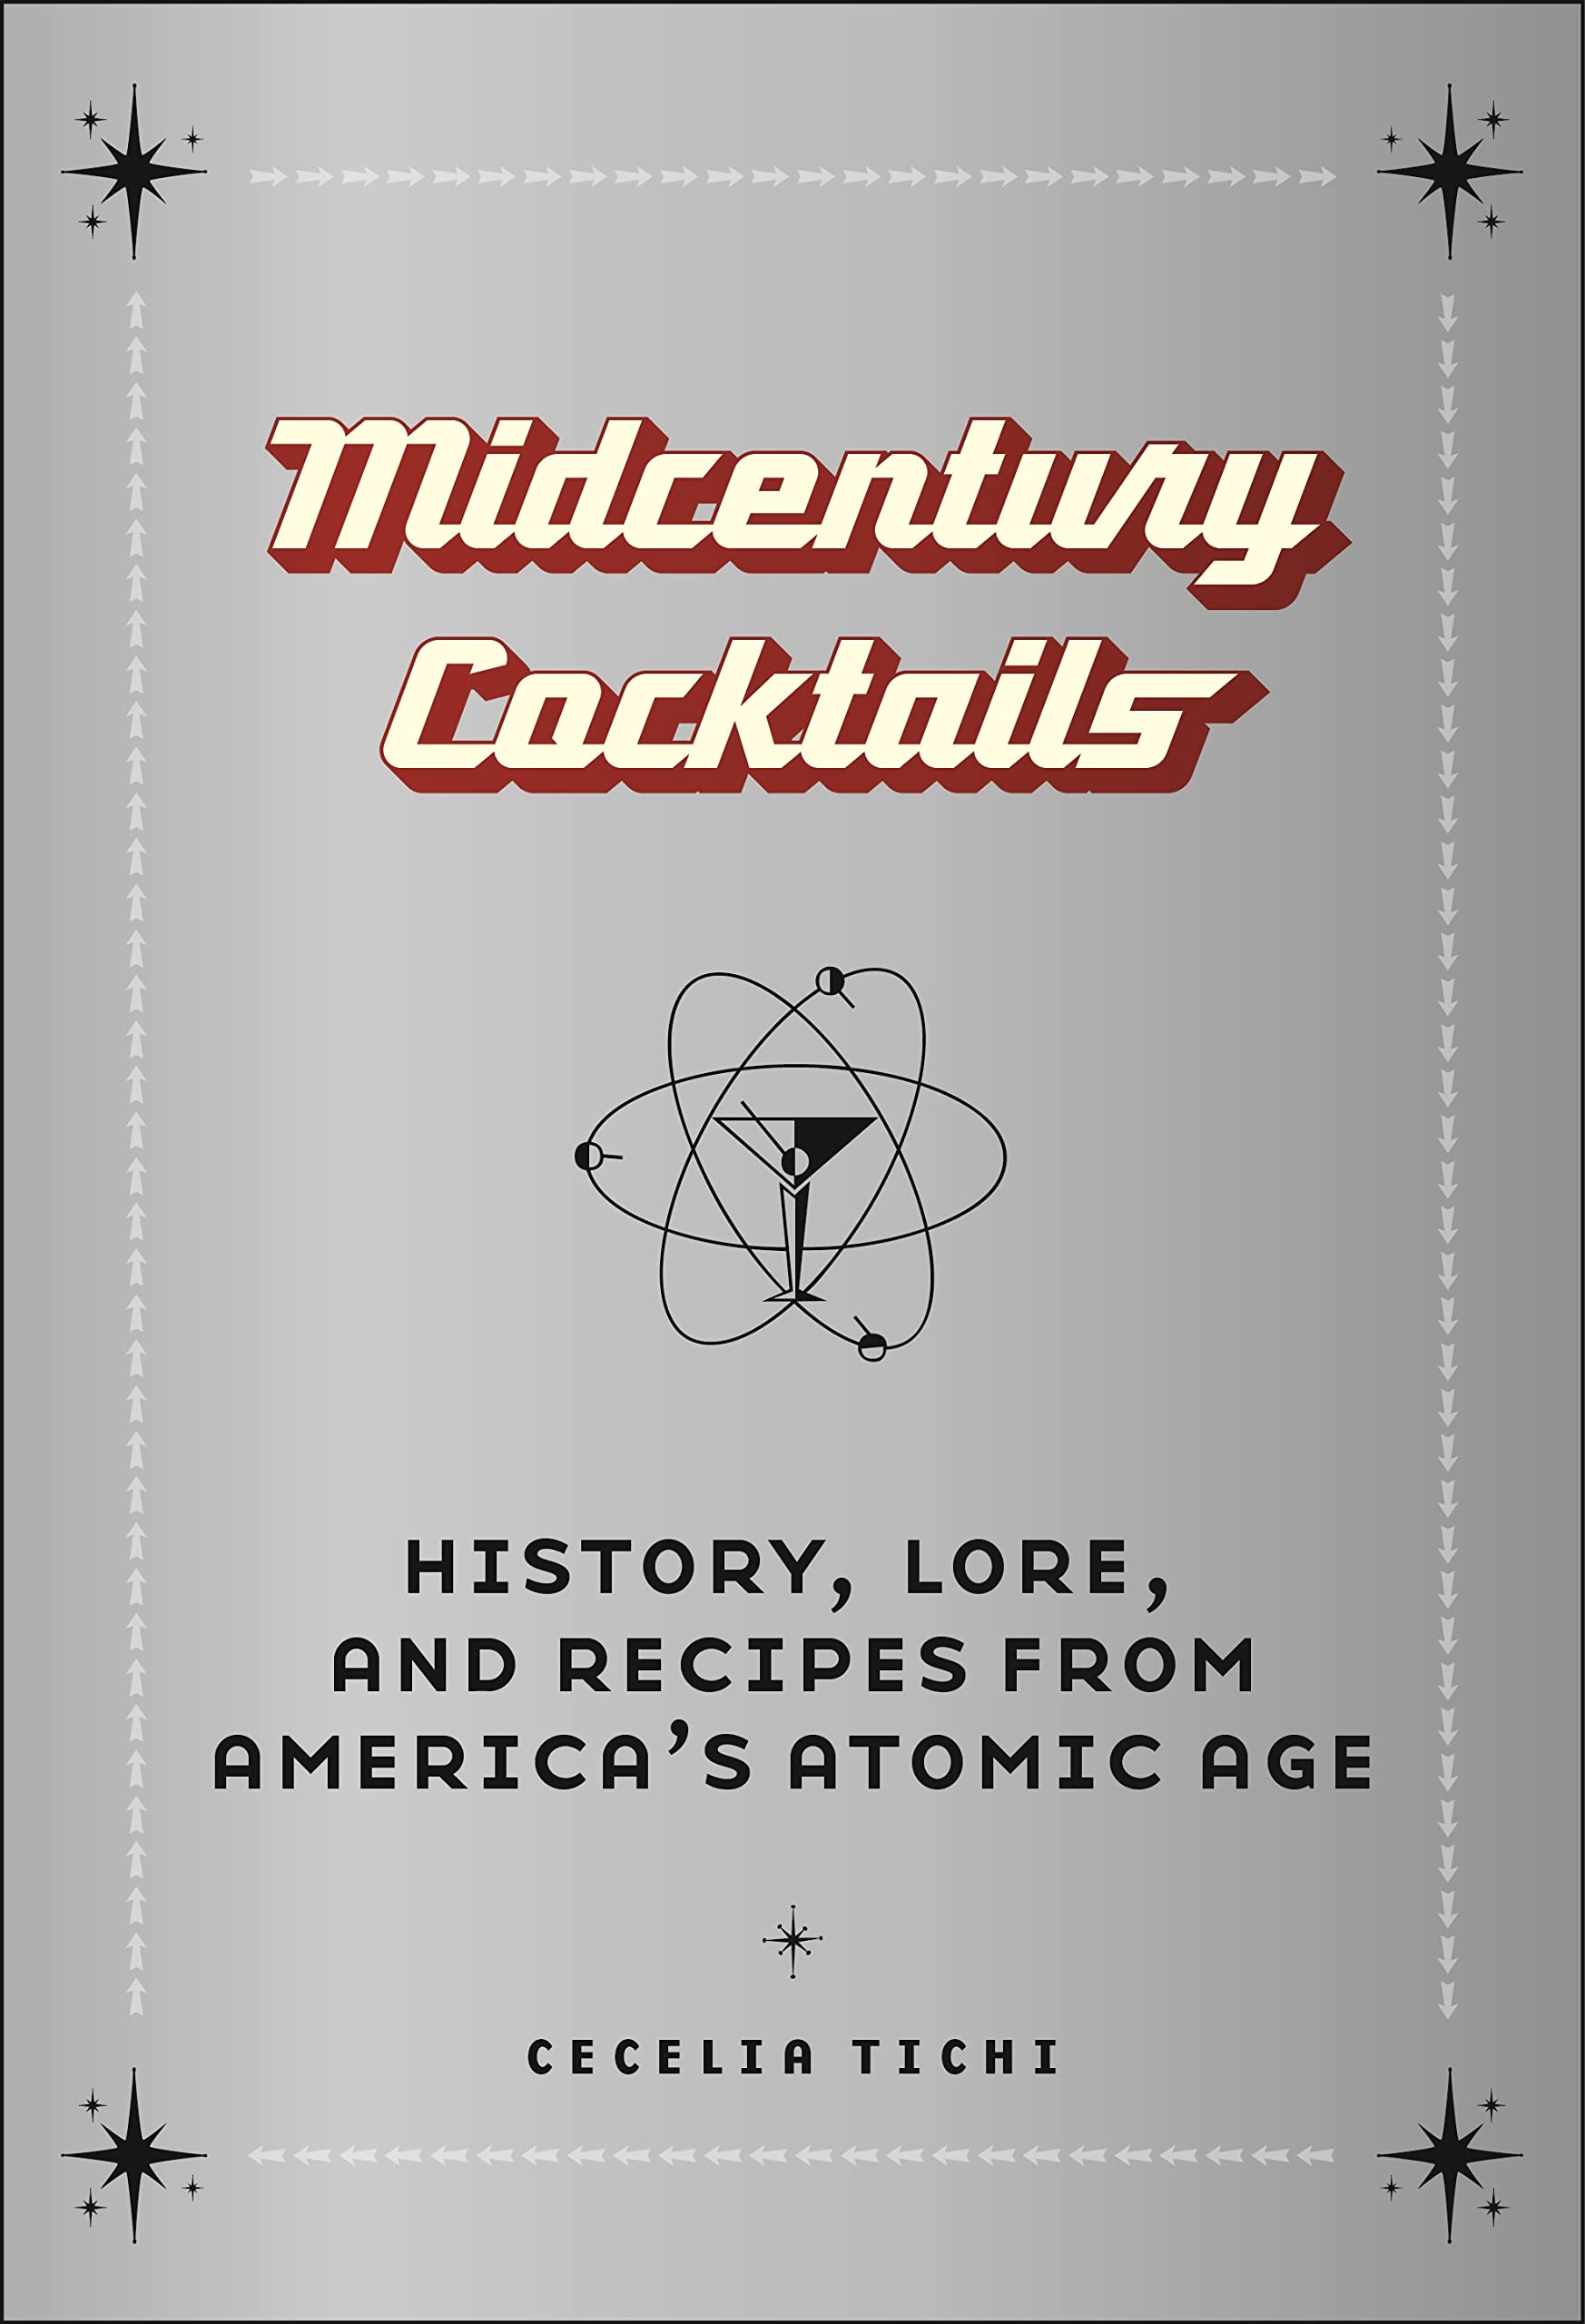 Midcentury Cocktails: History, Lore, and Recipes from America’s Atomic Age